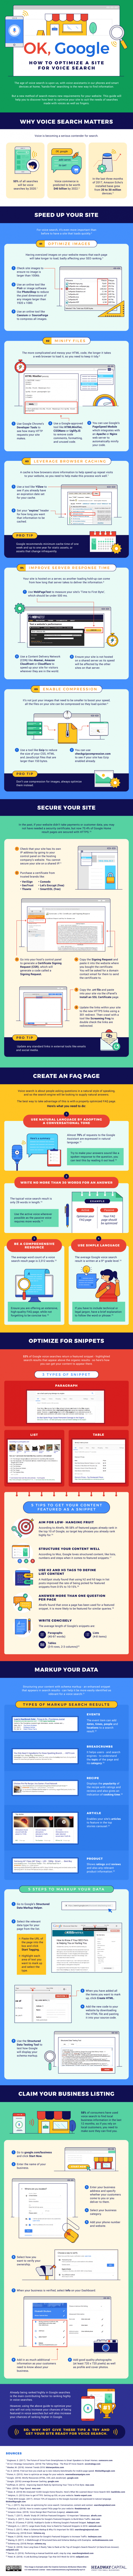 how to optimize for voice search infographic